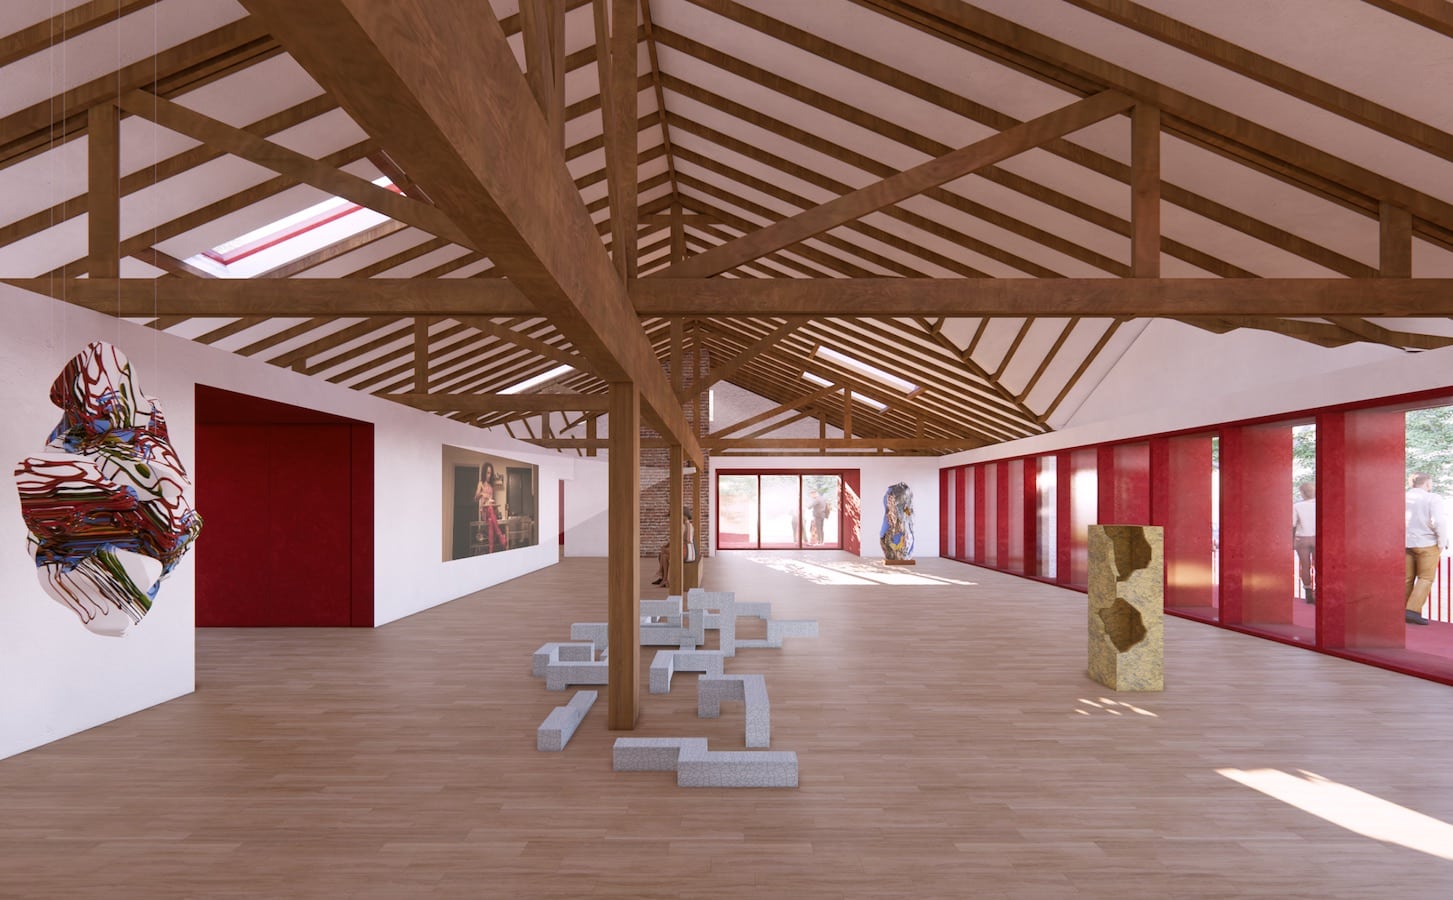 A rendering of an art gallery with wooden beams and red walls.